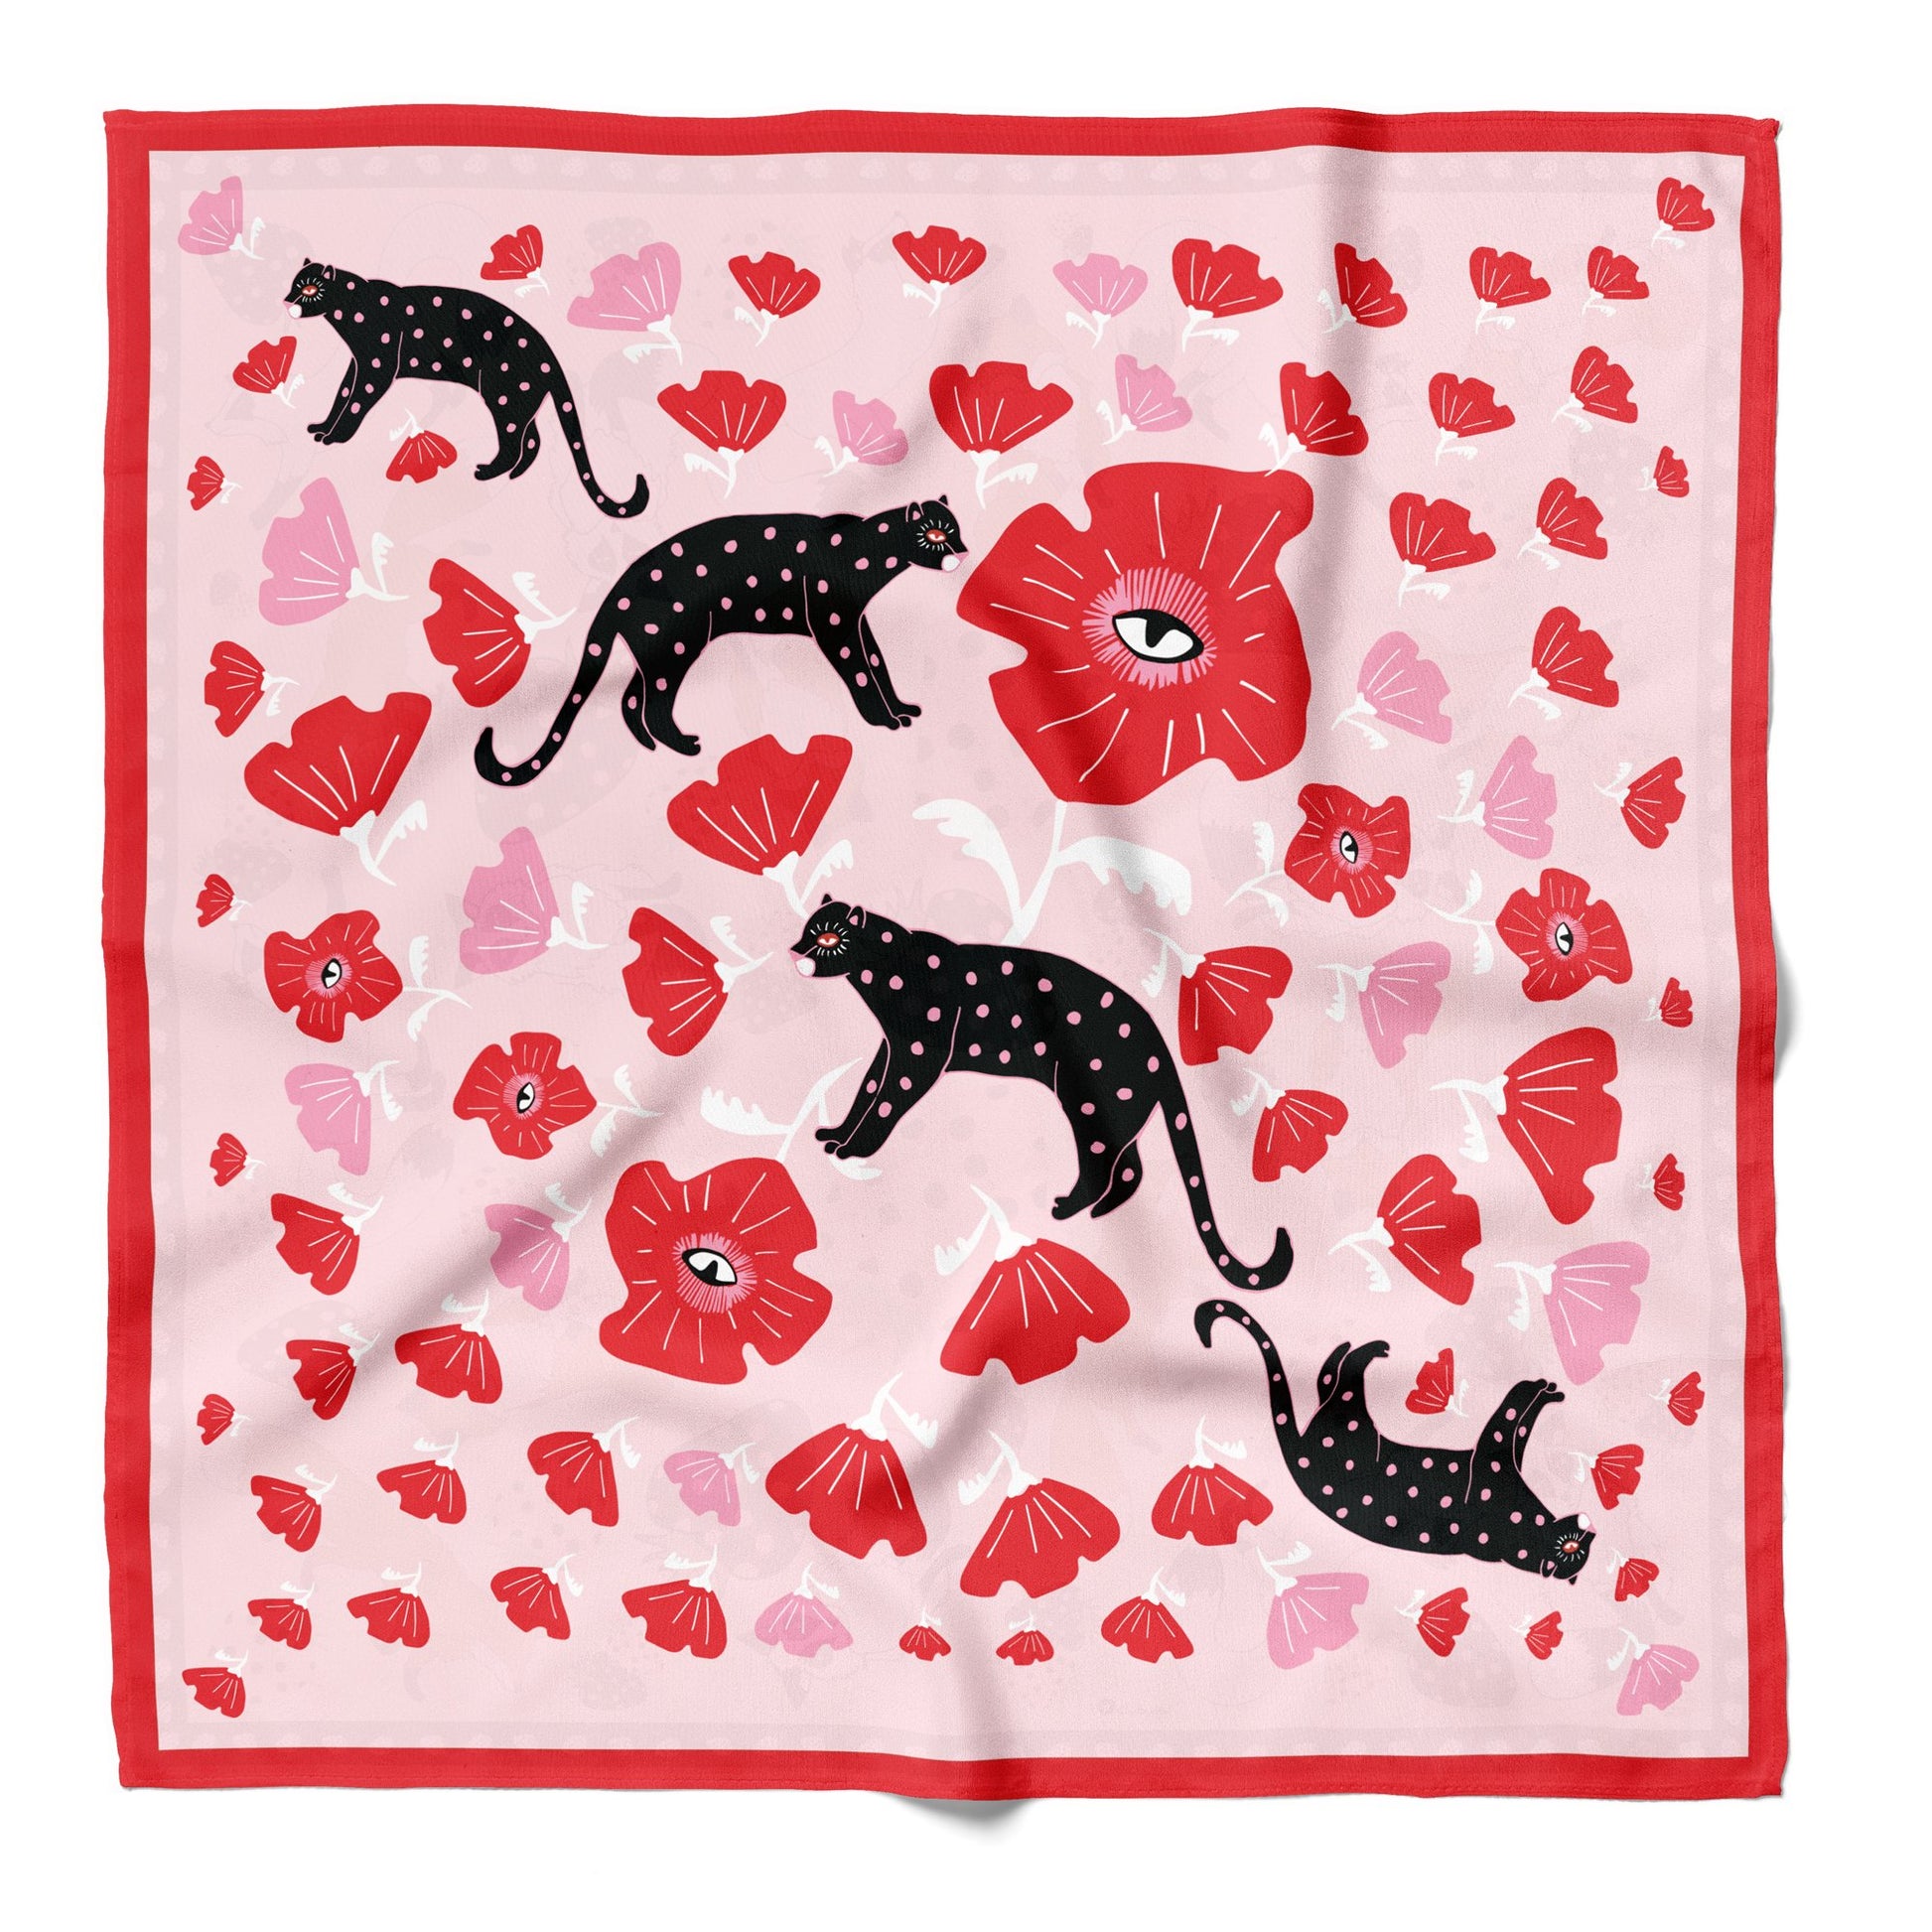 Black cats and red poppies on a cotton silk blend bandana, pink with a red border.